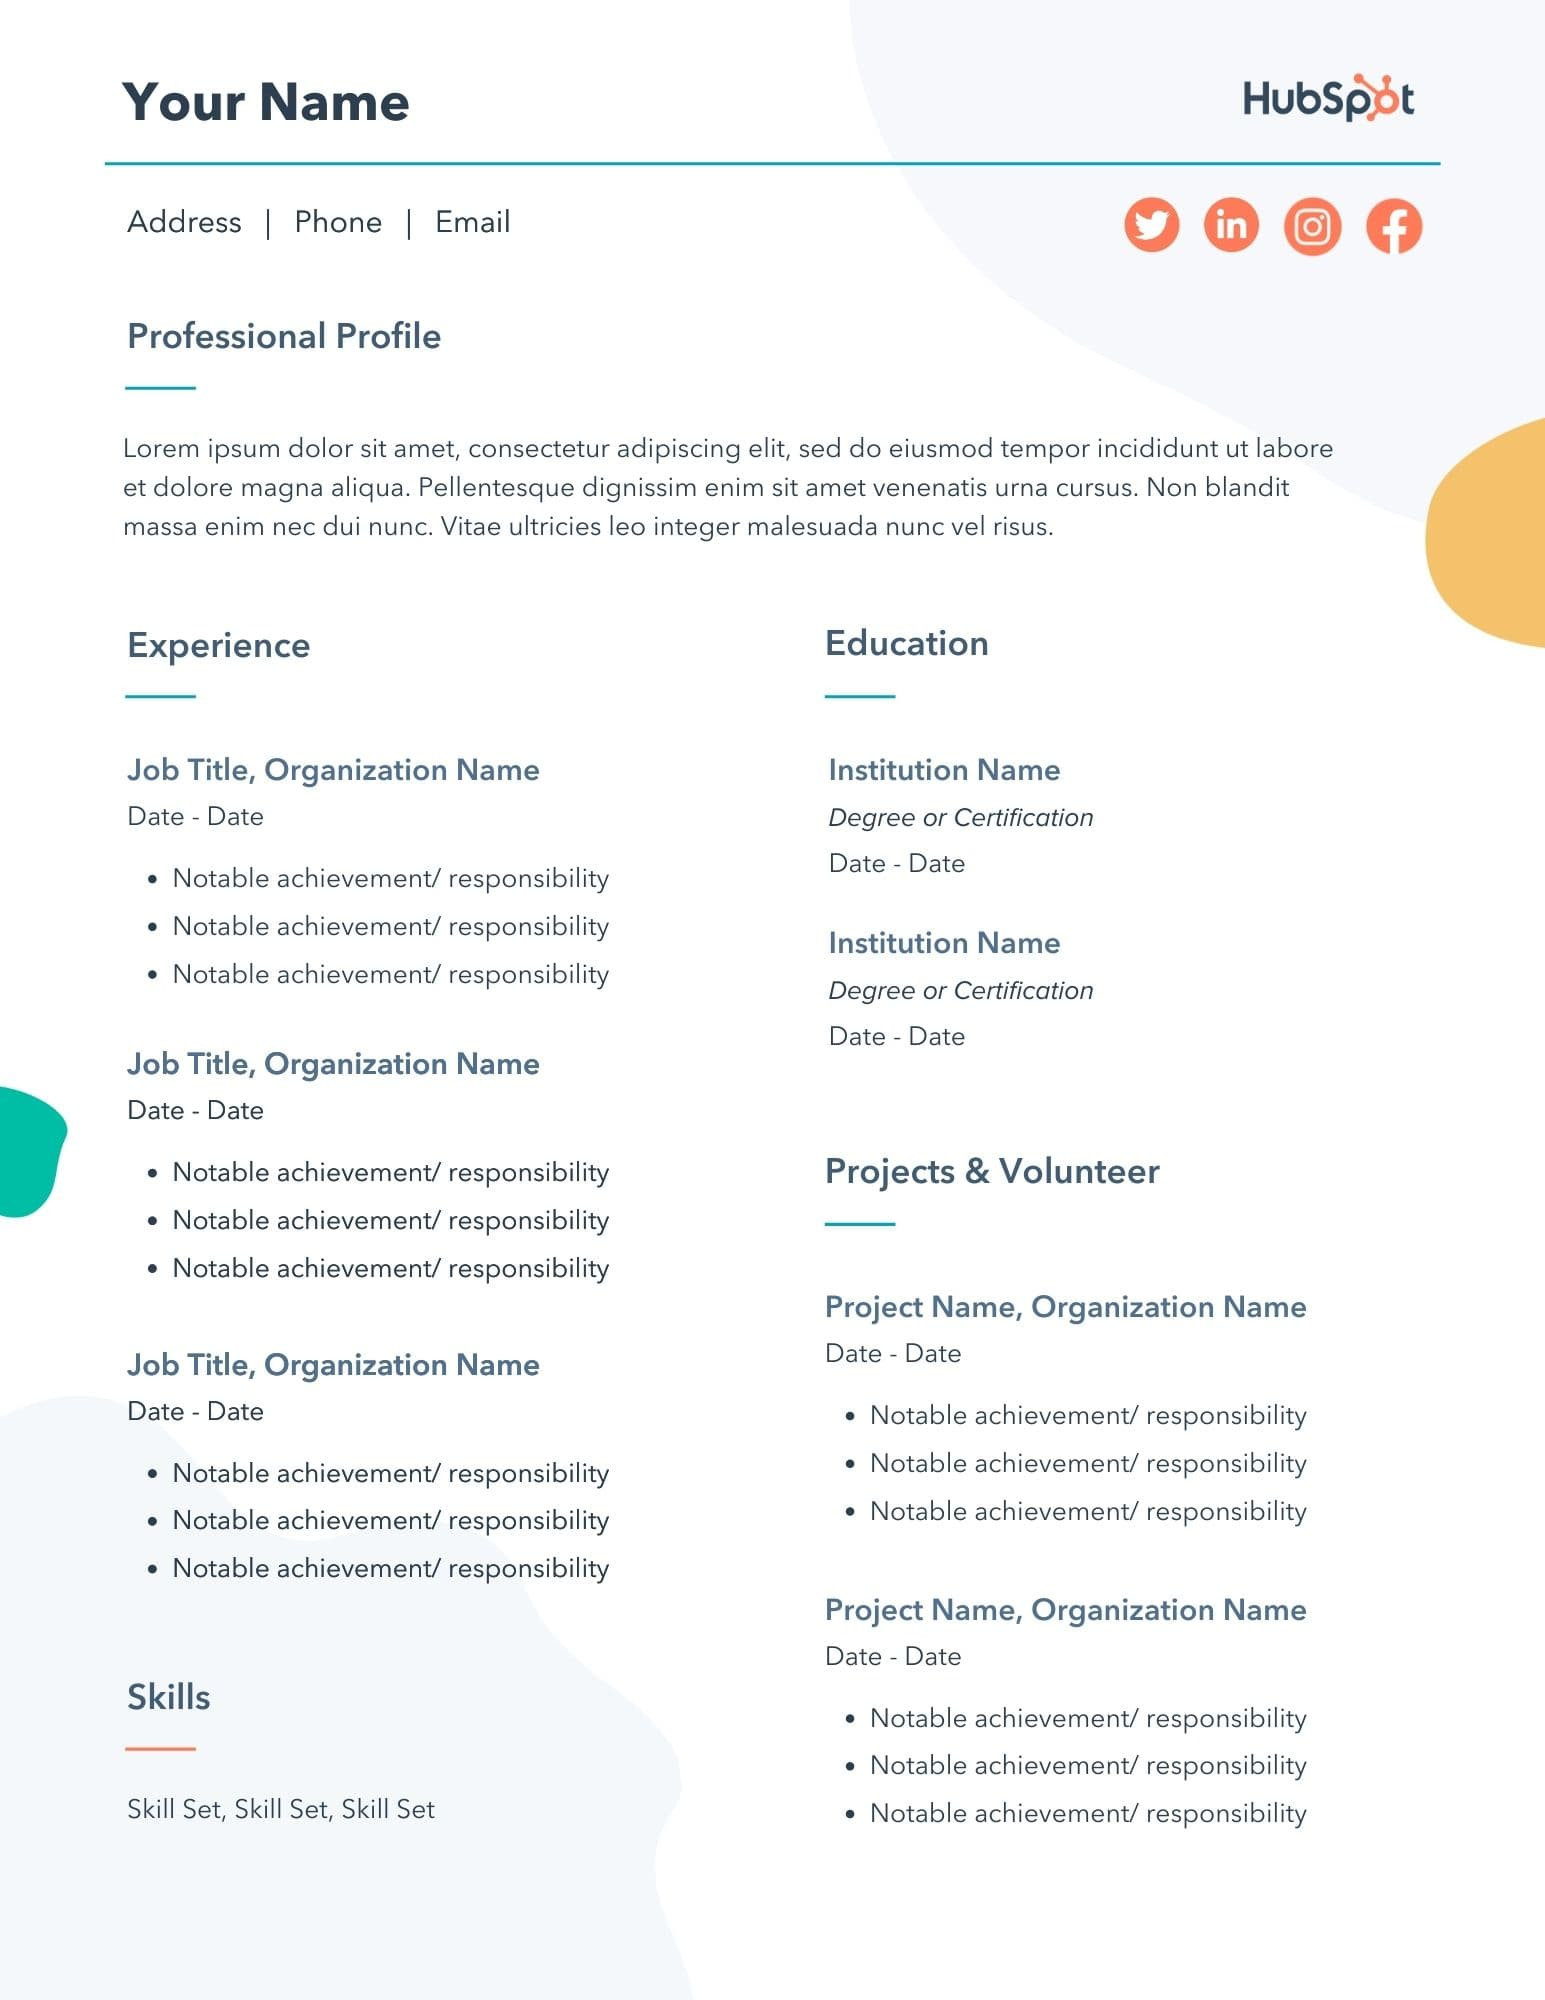 Create Your Own Resume Template Free 29 Free Resume Templates for Microsoft Word (& How to Make Your Own)